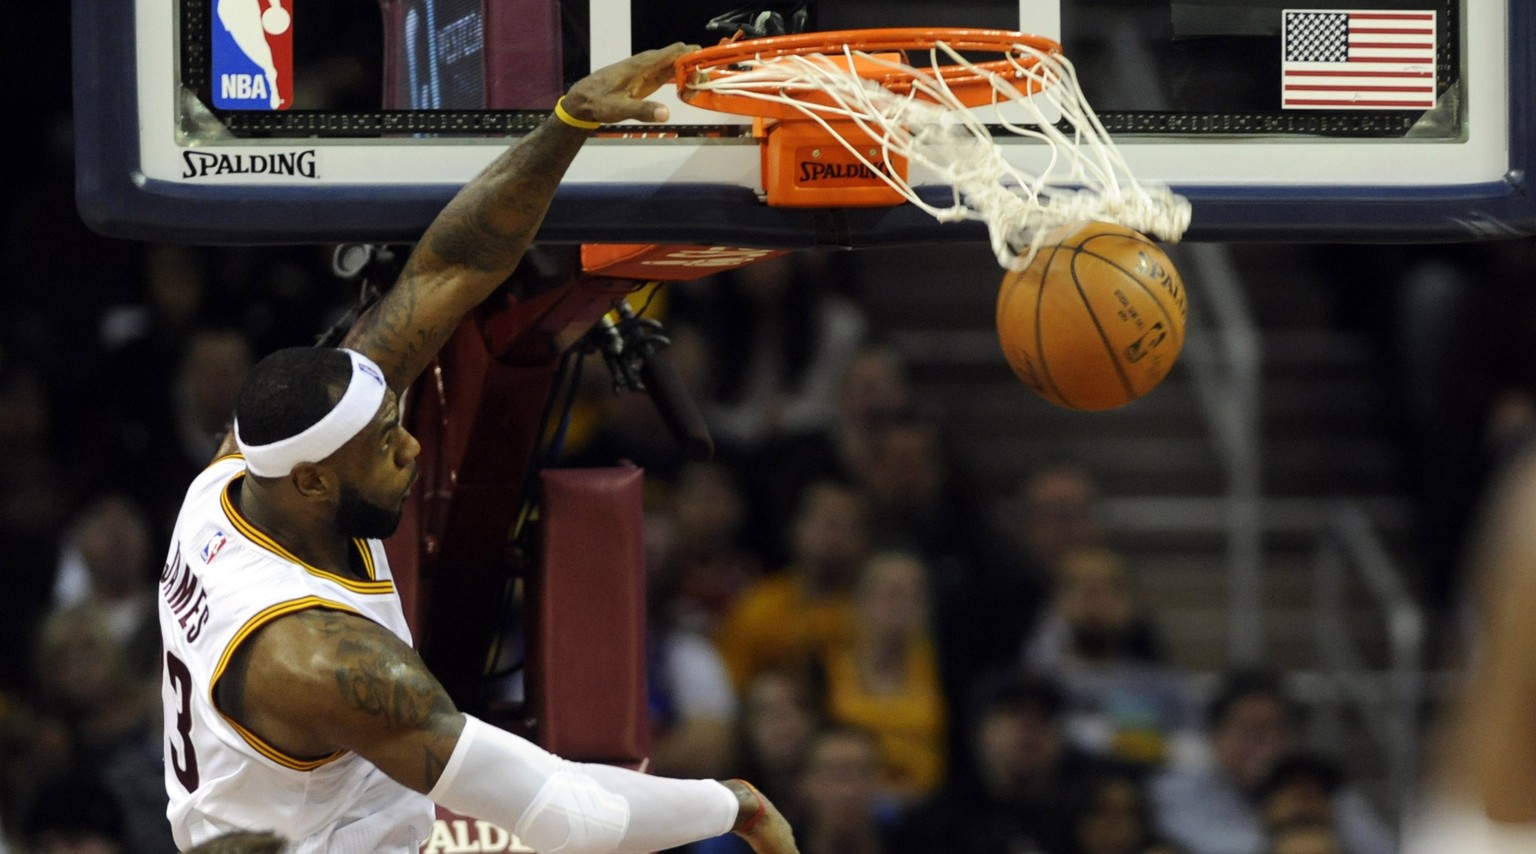 Dec 19, 2014; Cleveland, OH, USA; Cleveland Cavaliers forward LeBron James (23) slam dunks during the second quarter against the Brooklyn Nets at Quicken Loans Arena. Mandatory Credit: Ken Blaze-USA T ...